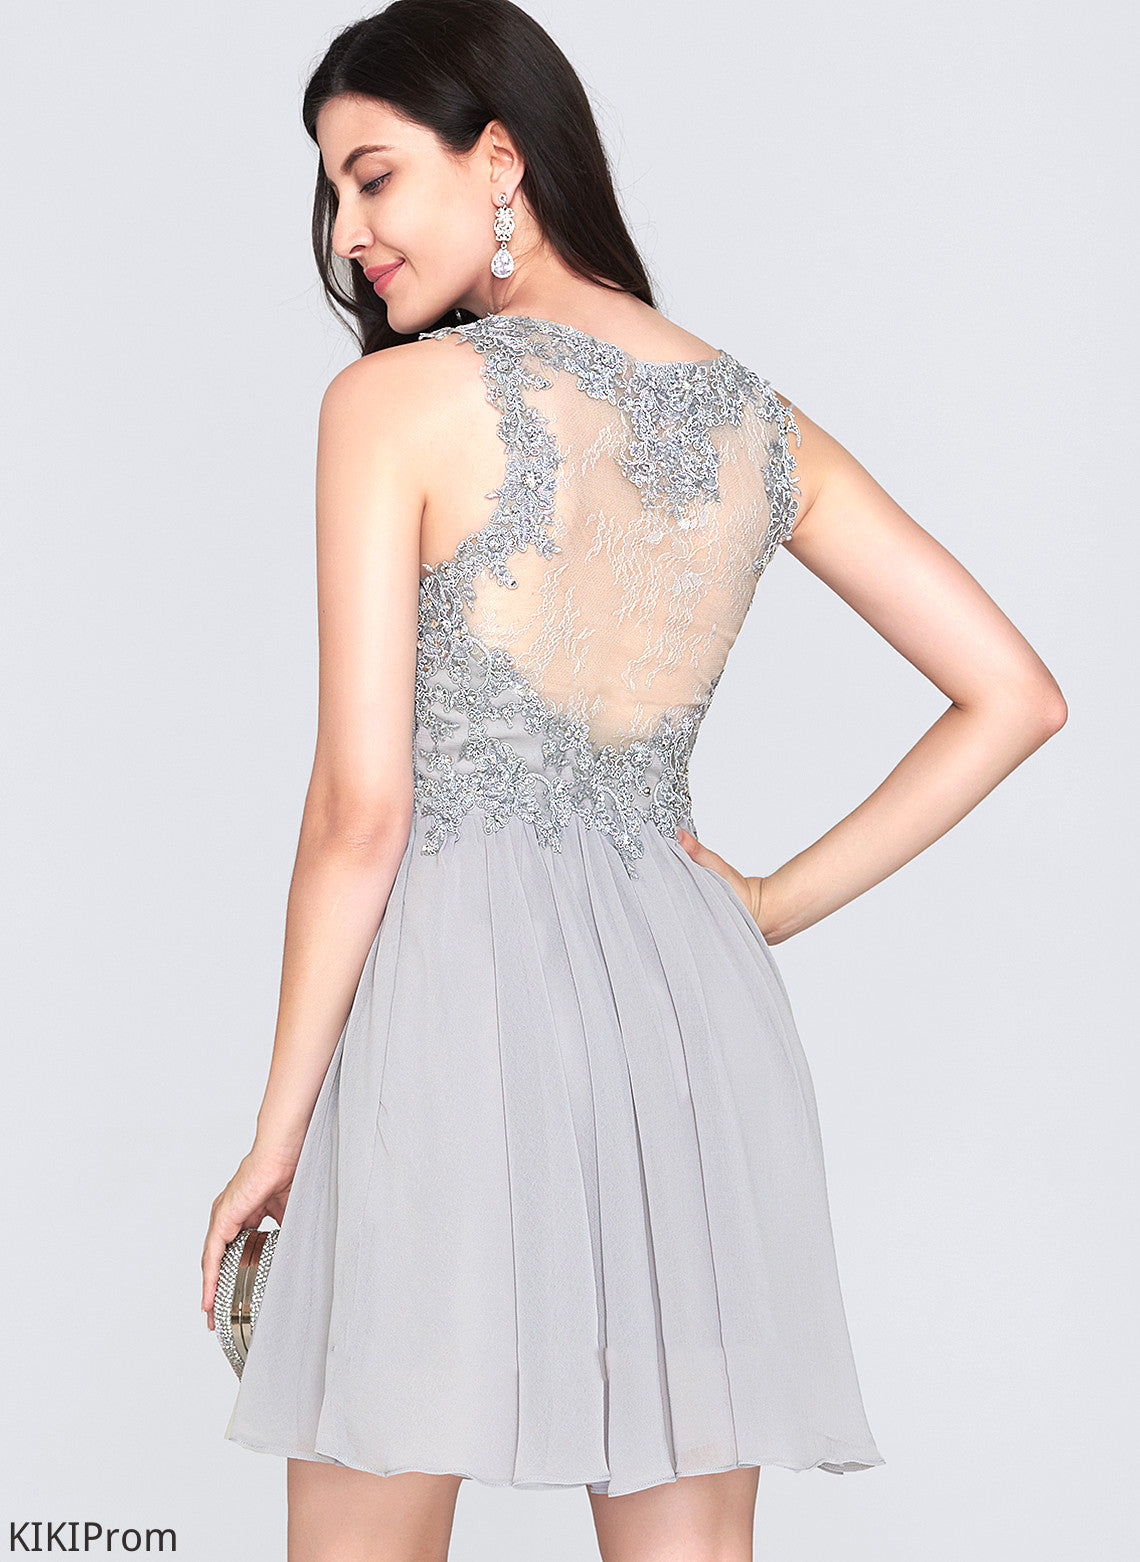 A-Line Homecoming Dresses Sweetheart Sequins Short/Mini Lace Dress Chiffon Homecoming With Beading Alyson